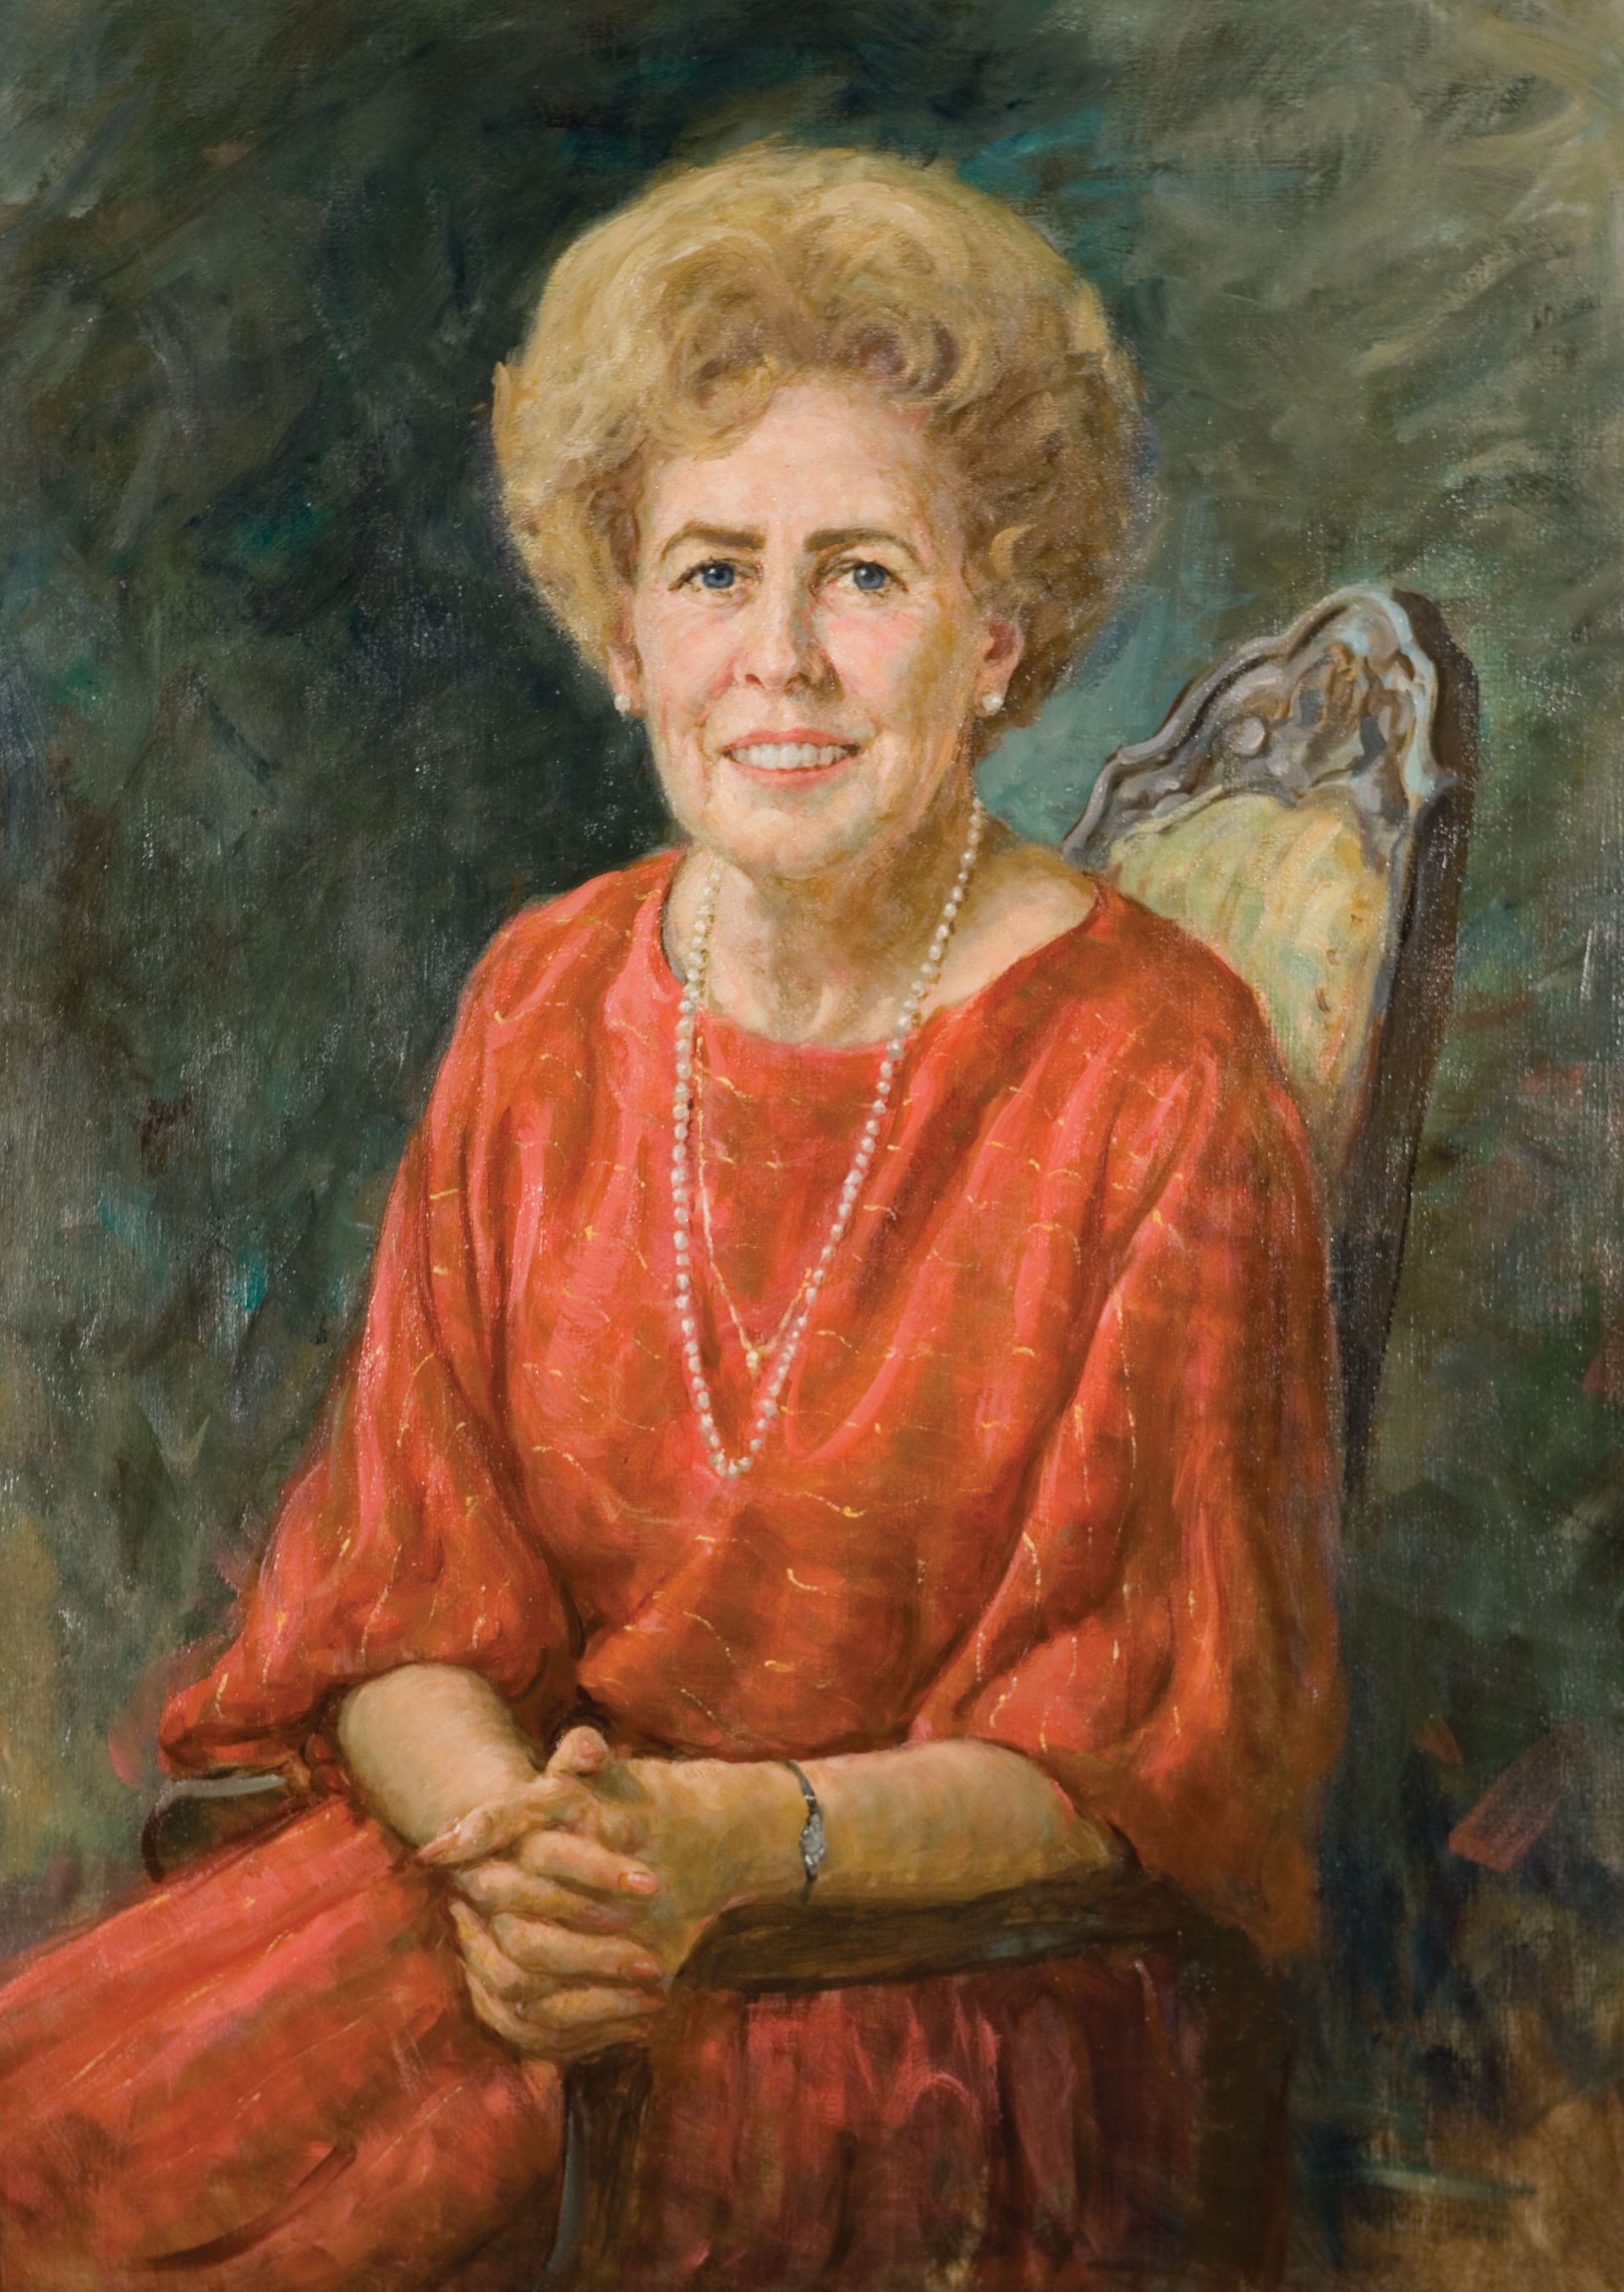 A portrait of Naomi Maxfield Shumway, who served as the sixth Primary general president from 1974 to 1980.